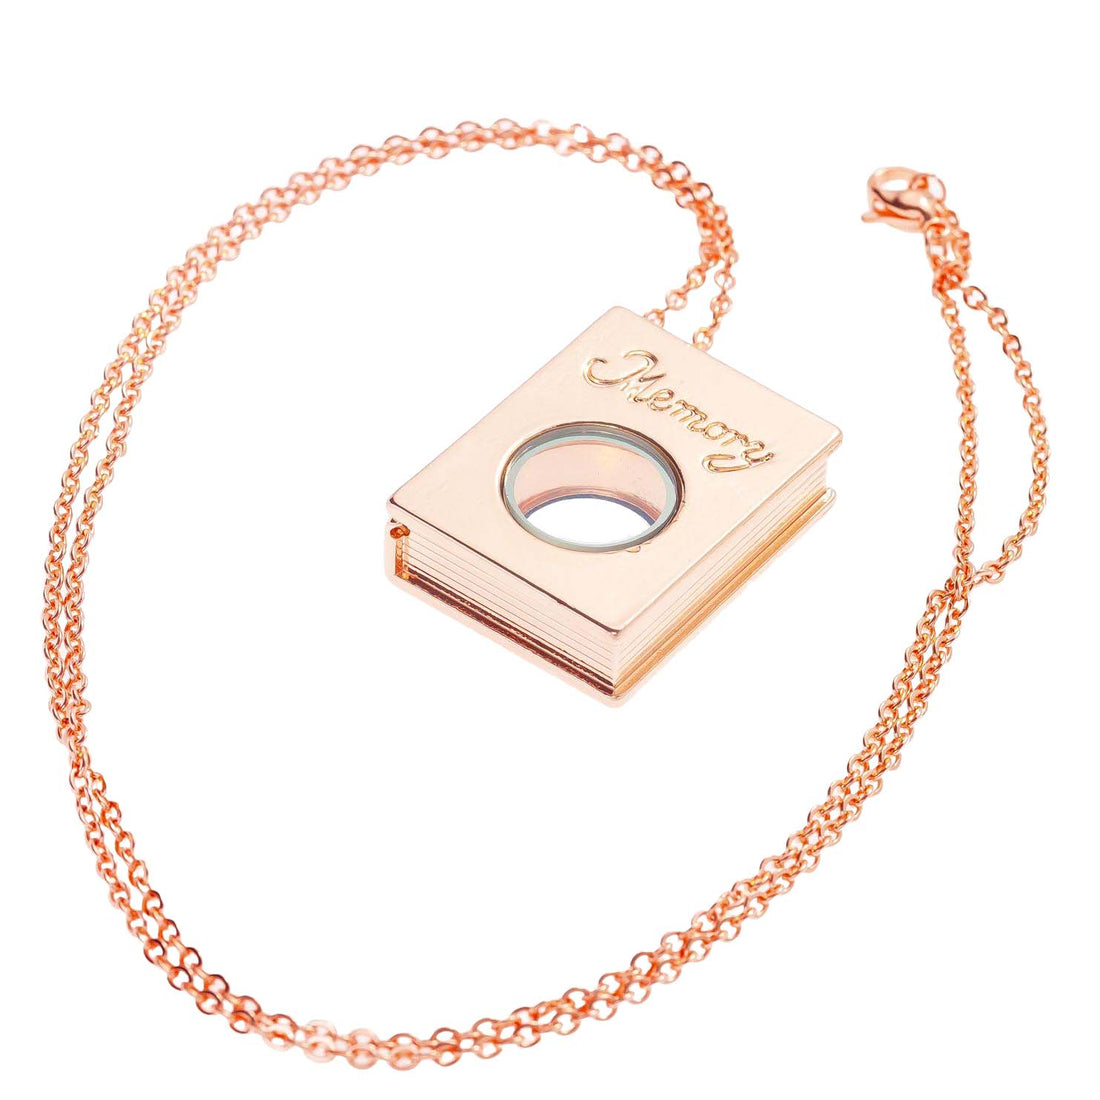 Glass Locket Pendant Magnetic - Rose Gold Memory Book with Chain